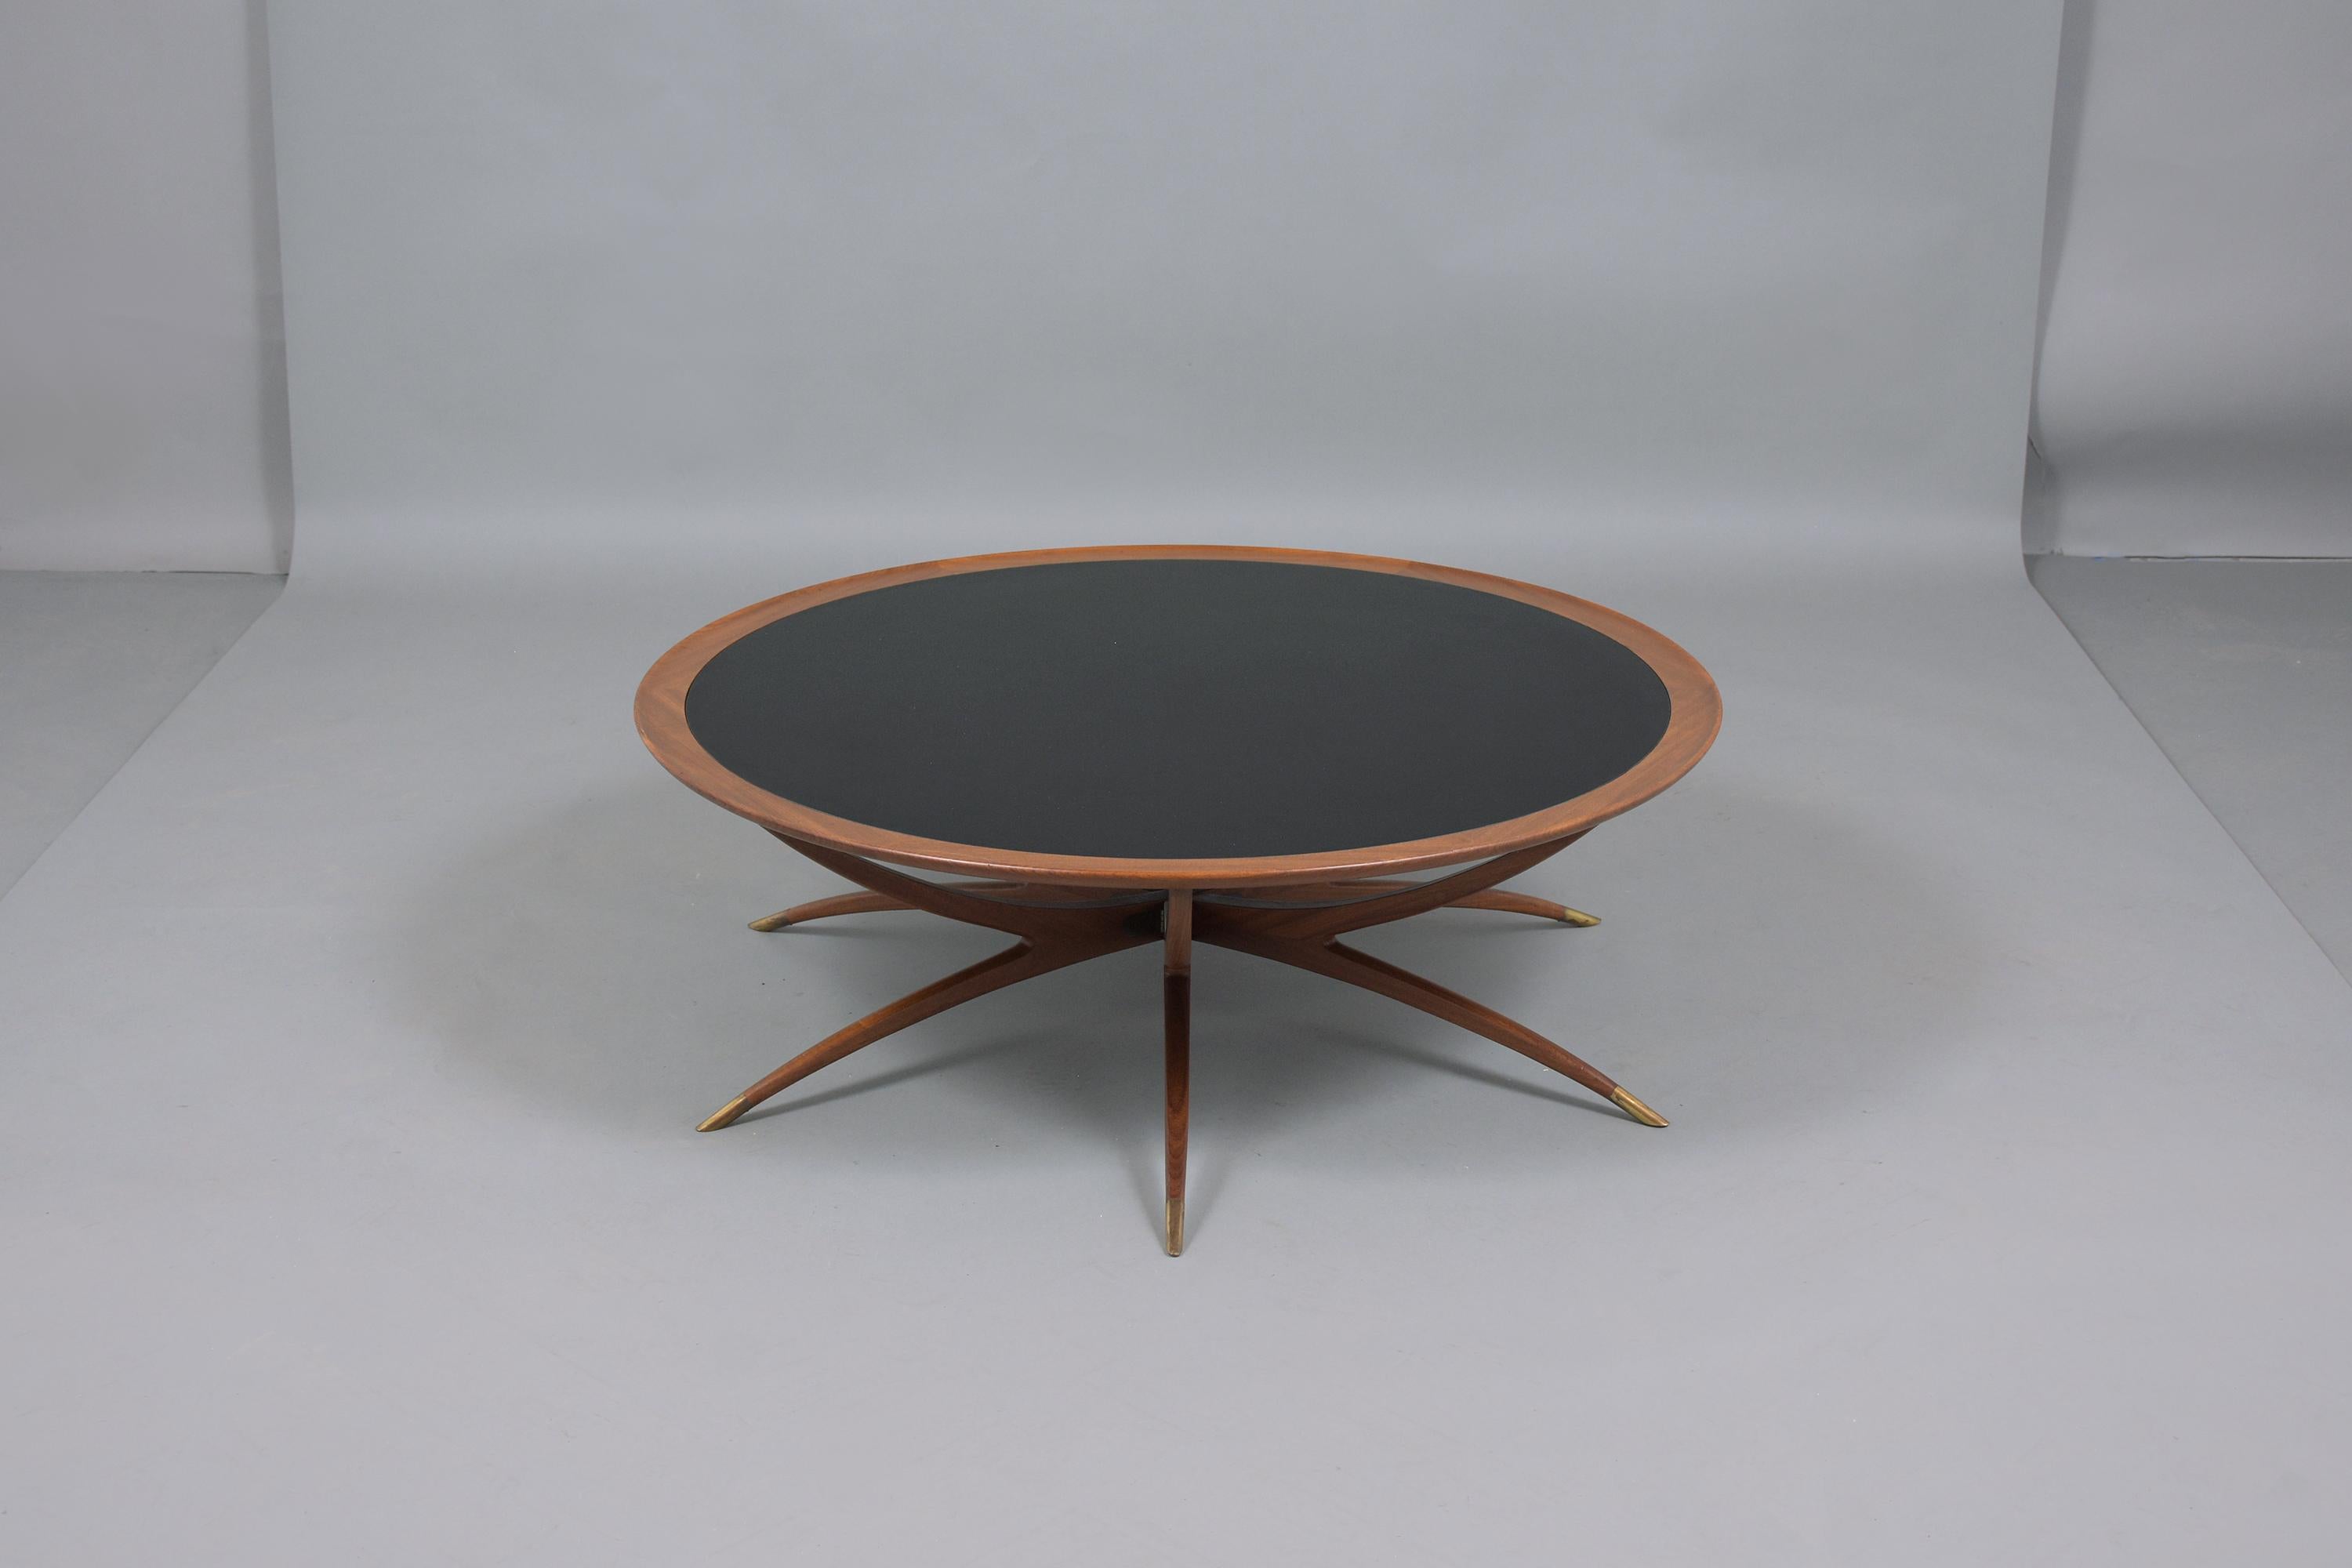 This mid-century danish spider leg coffee table is made in the style of Carlo di Carli, crafted out of solid wood, and professionally restored by our team of in-house craftsmen. The table comes with black tinted glass in good condition, its natural